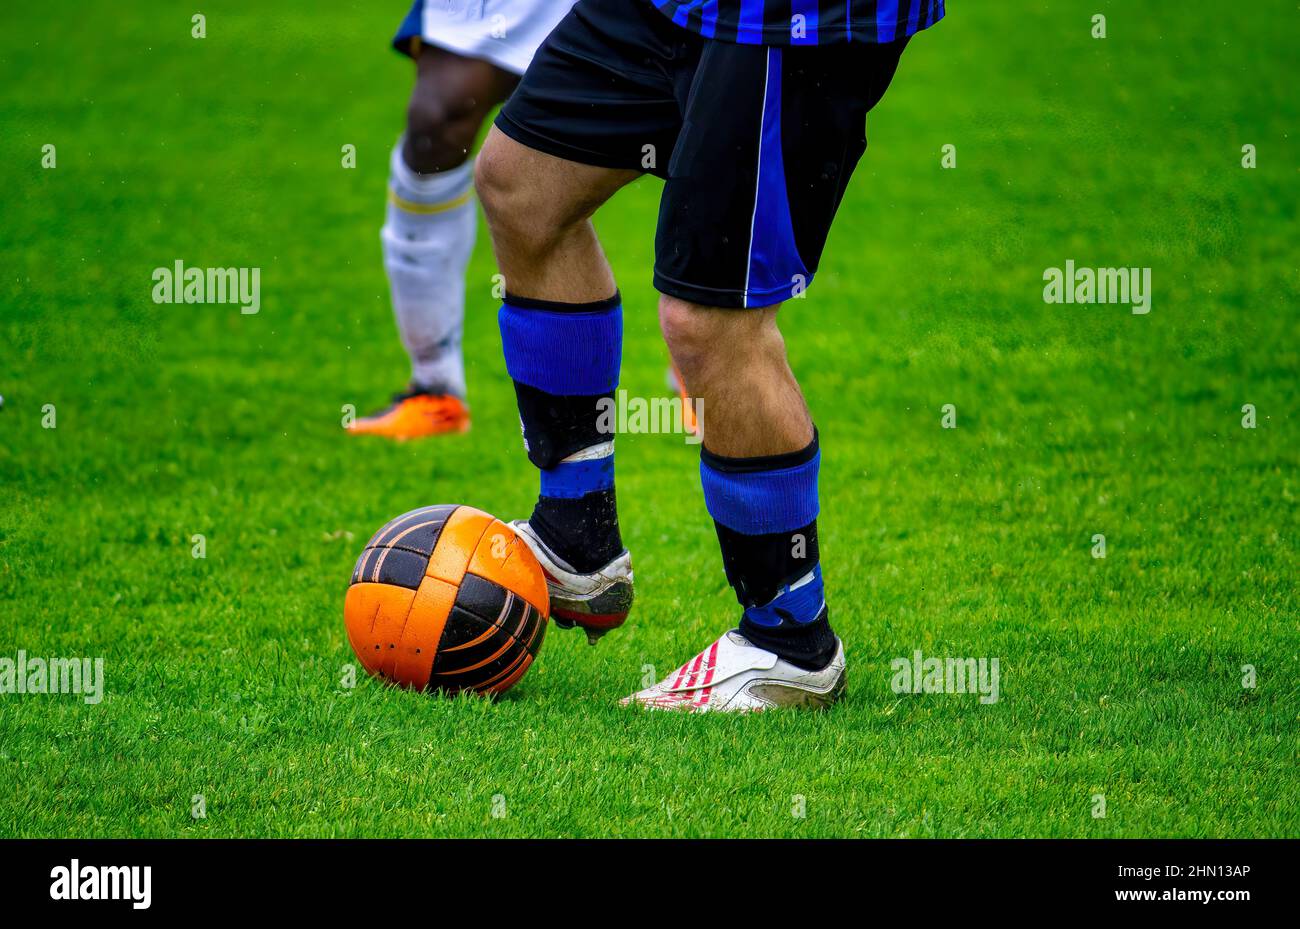 Football players tackling for the ball on soccer pitch Stock Photo